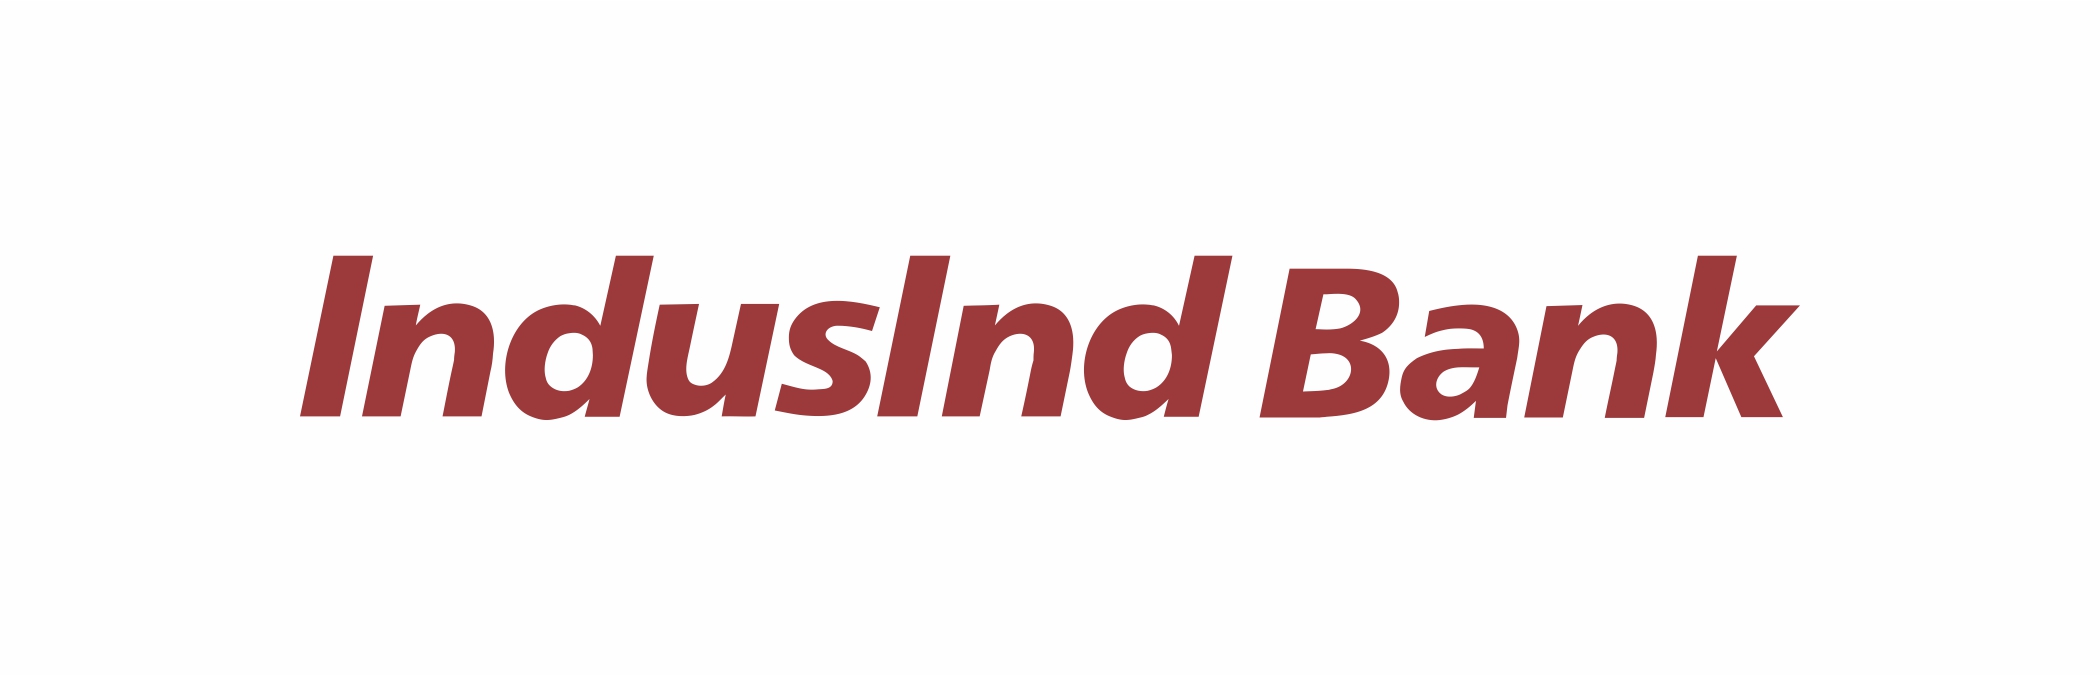 IndusInd Bank and Bharat Financial Inclusion Sign Exclusivity Agreement for Merger